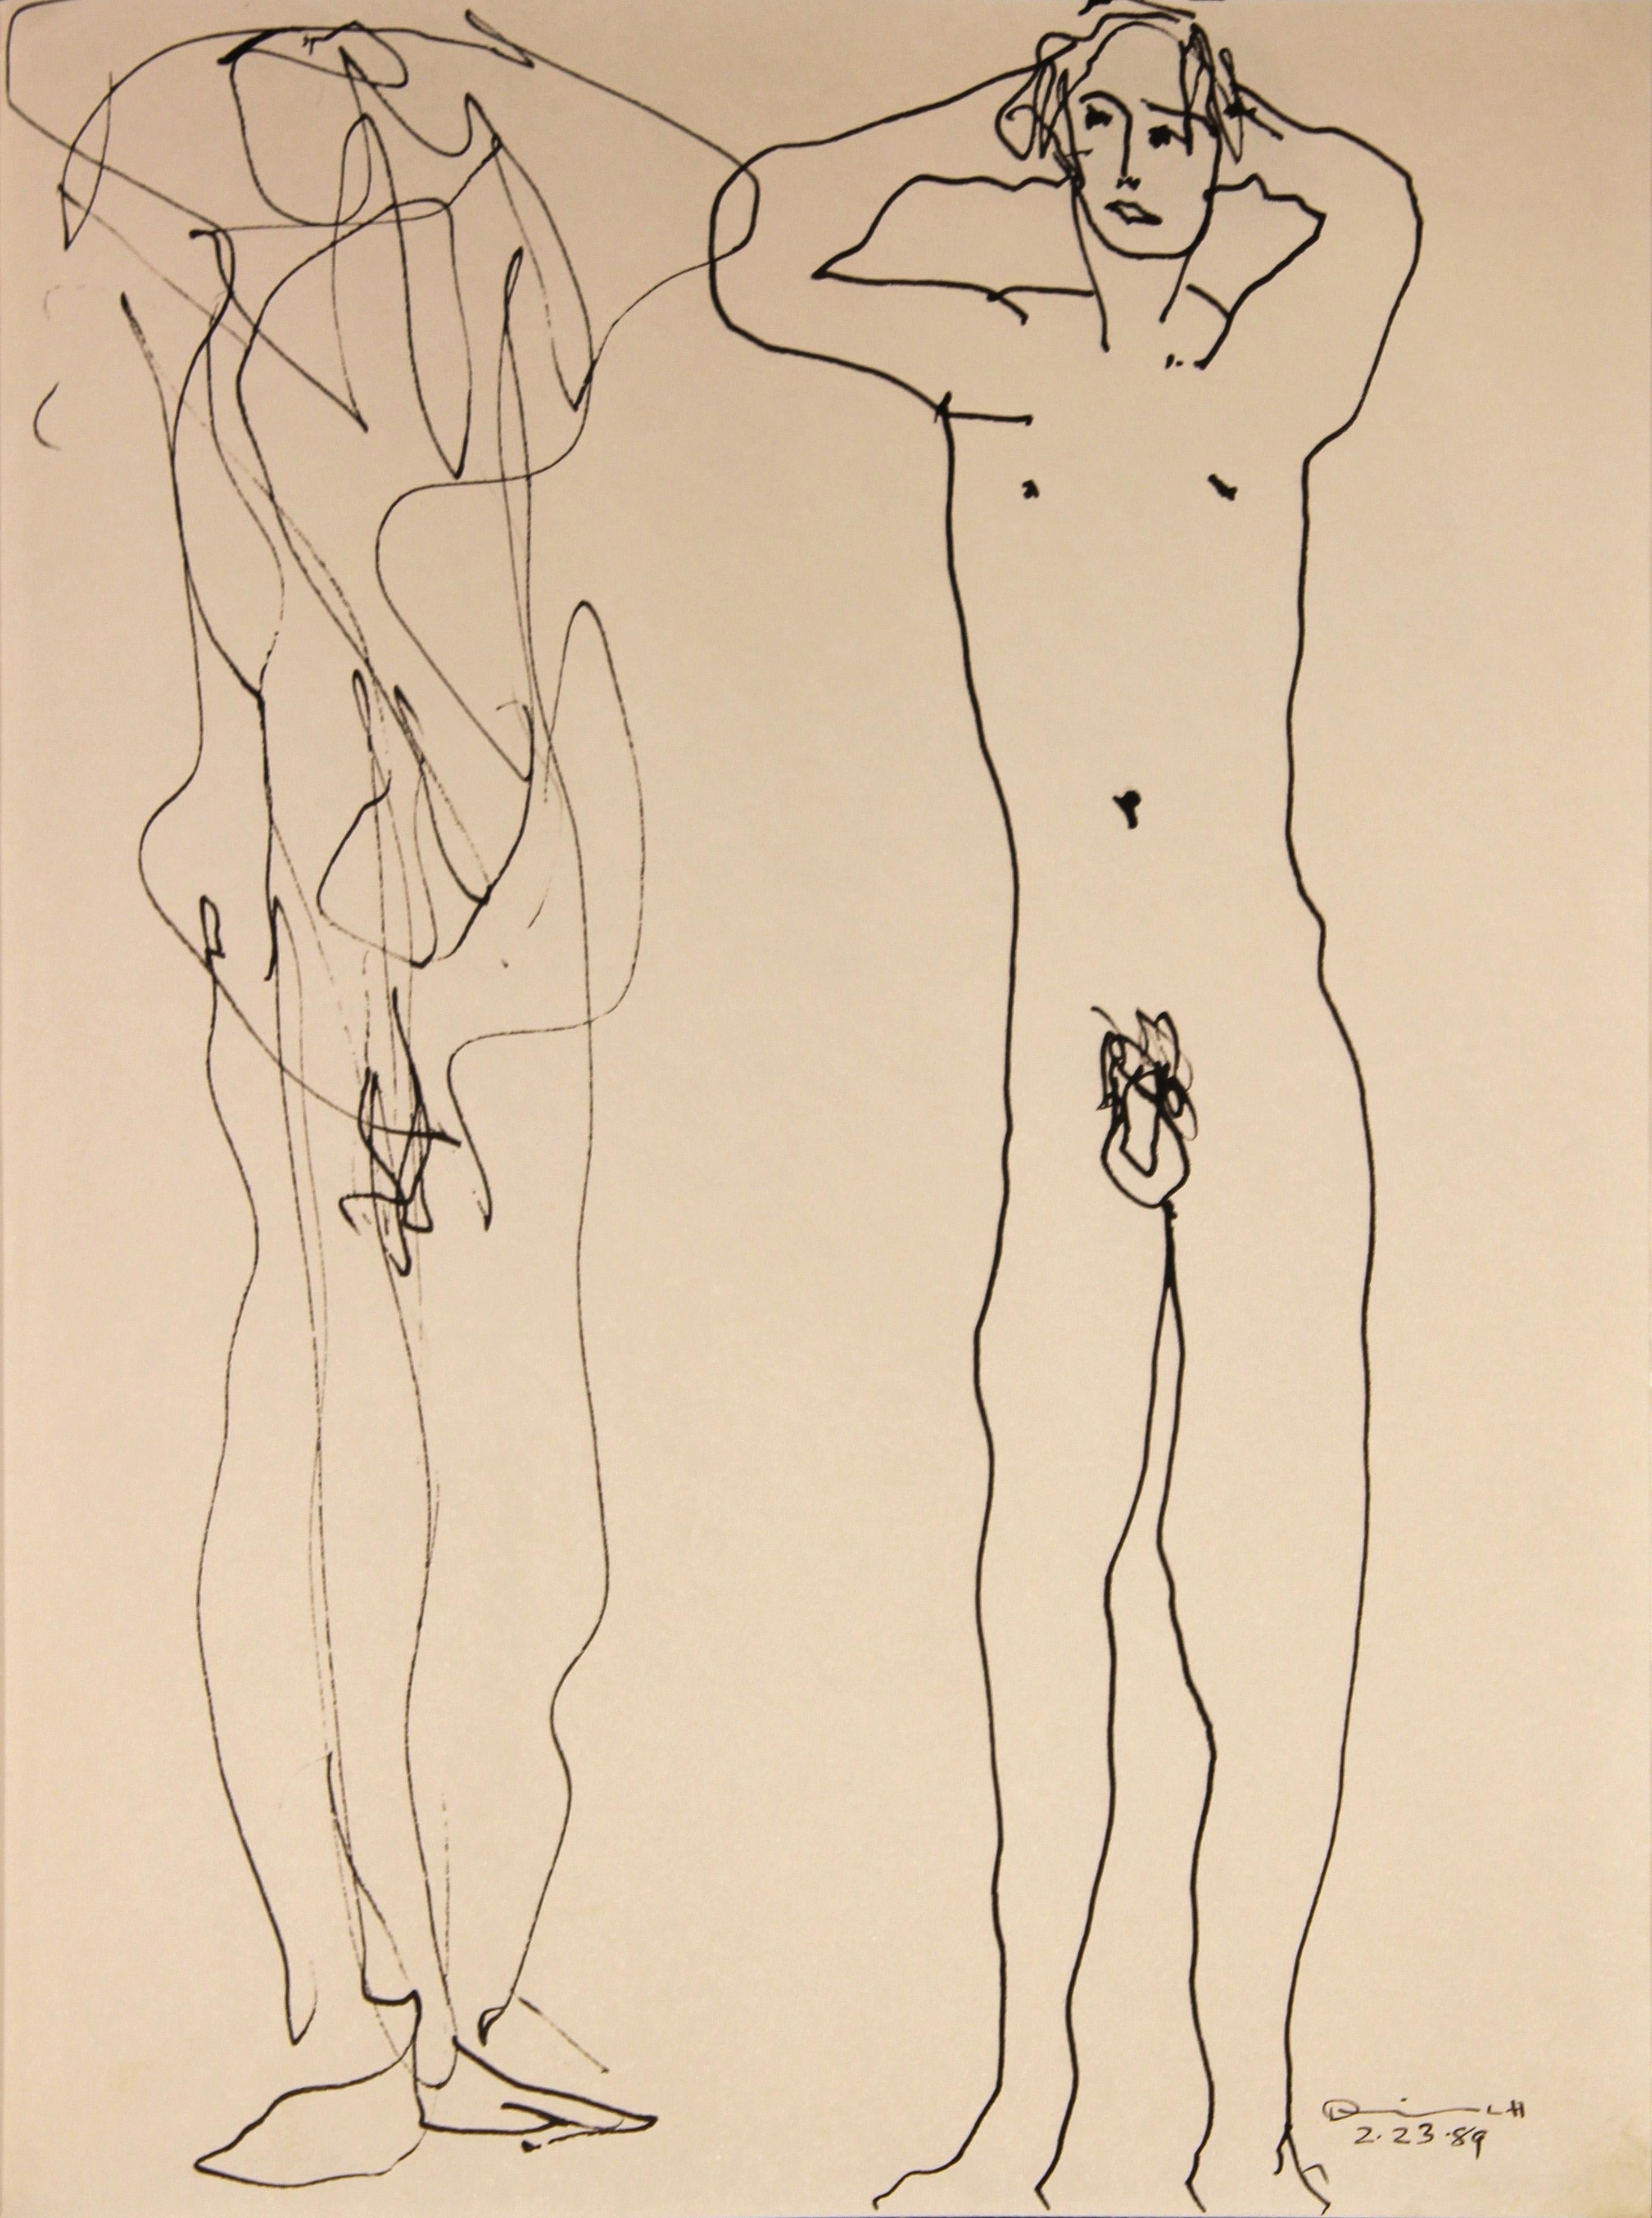 Modern Abstract Black Ink Line Drawing of a Pair of Standing Male Nudes - Art by Frank Dolejska